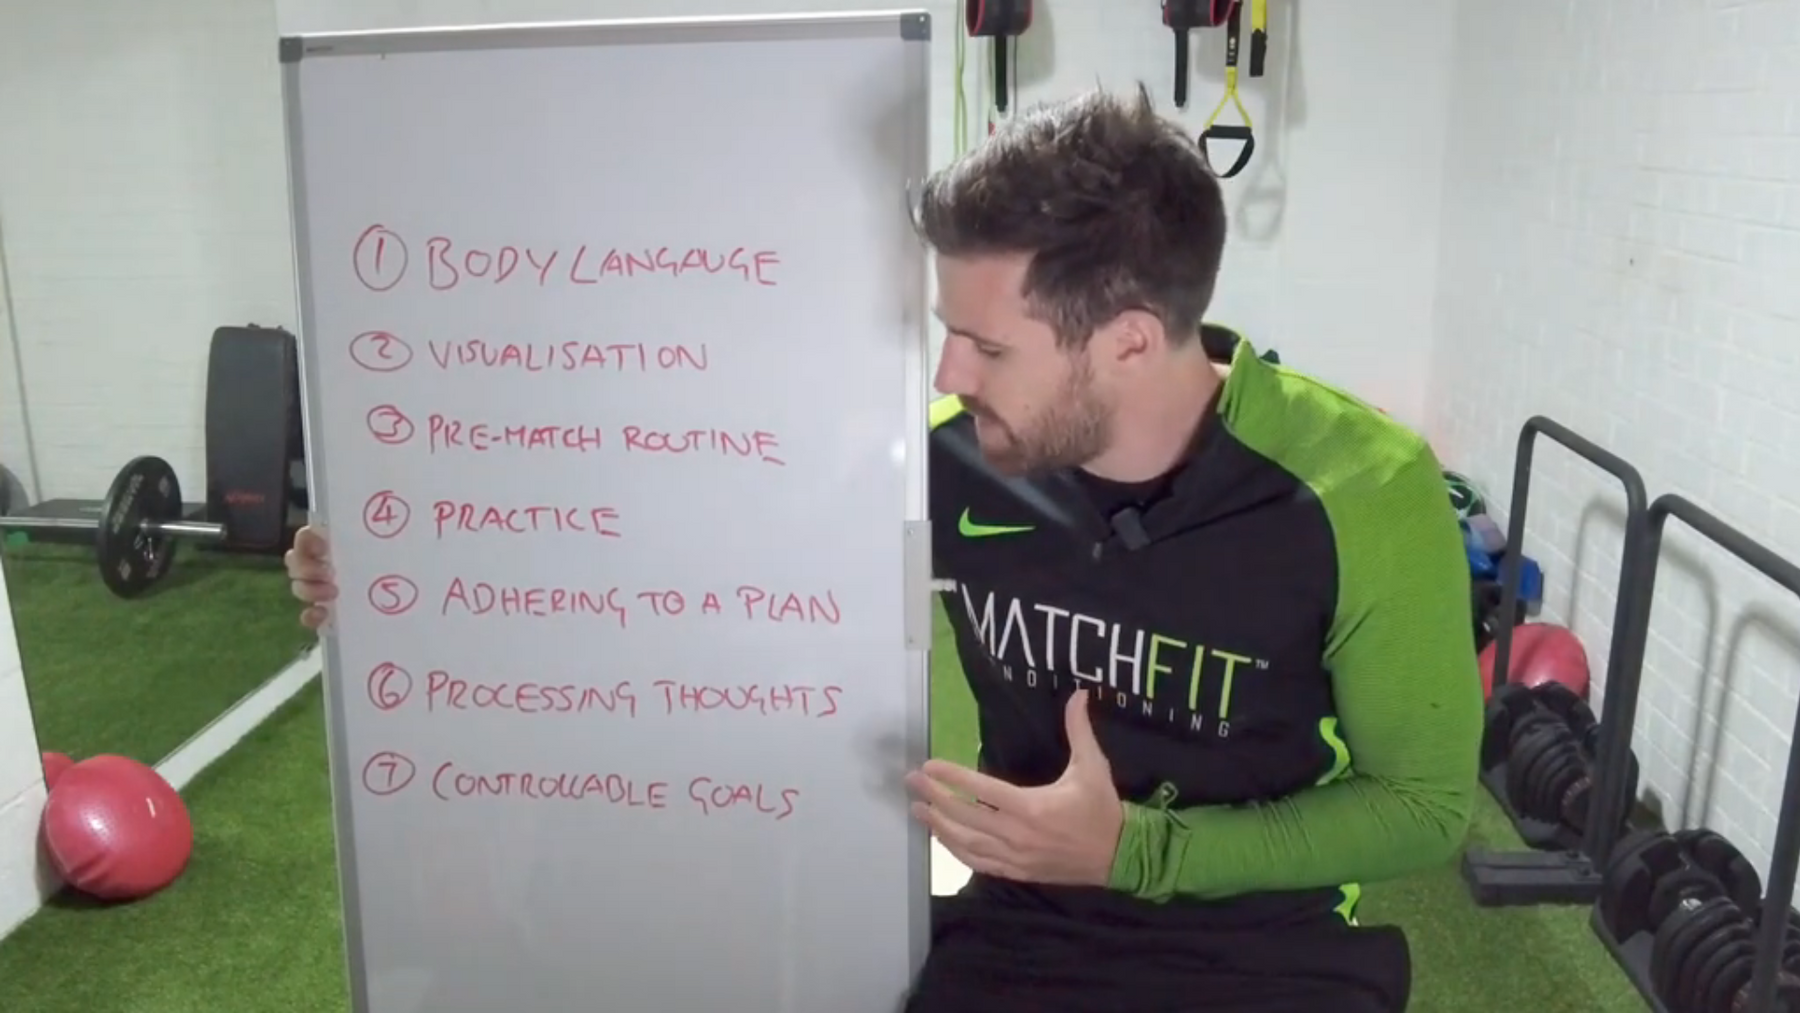 Want to feel more confident on the football pitch? Watch this!